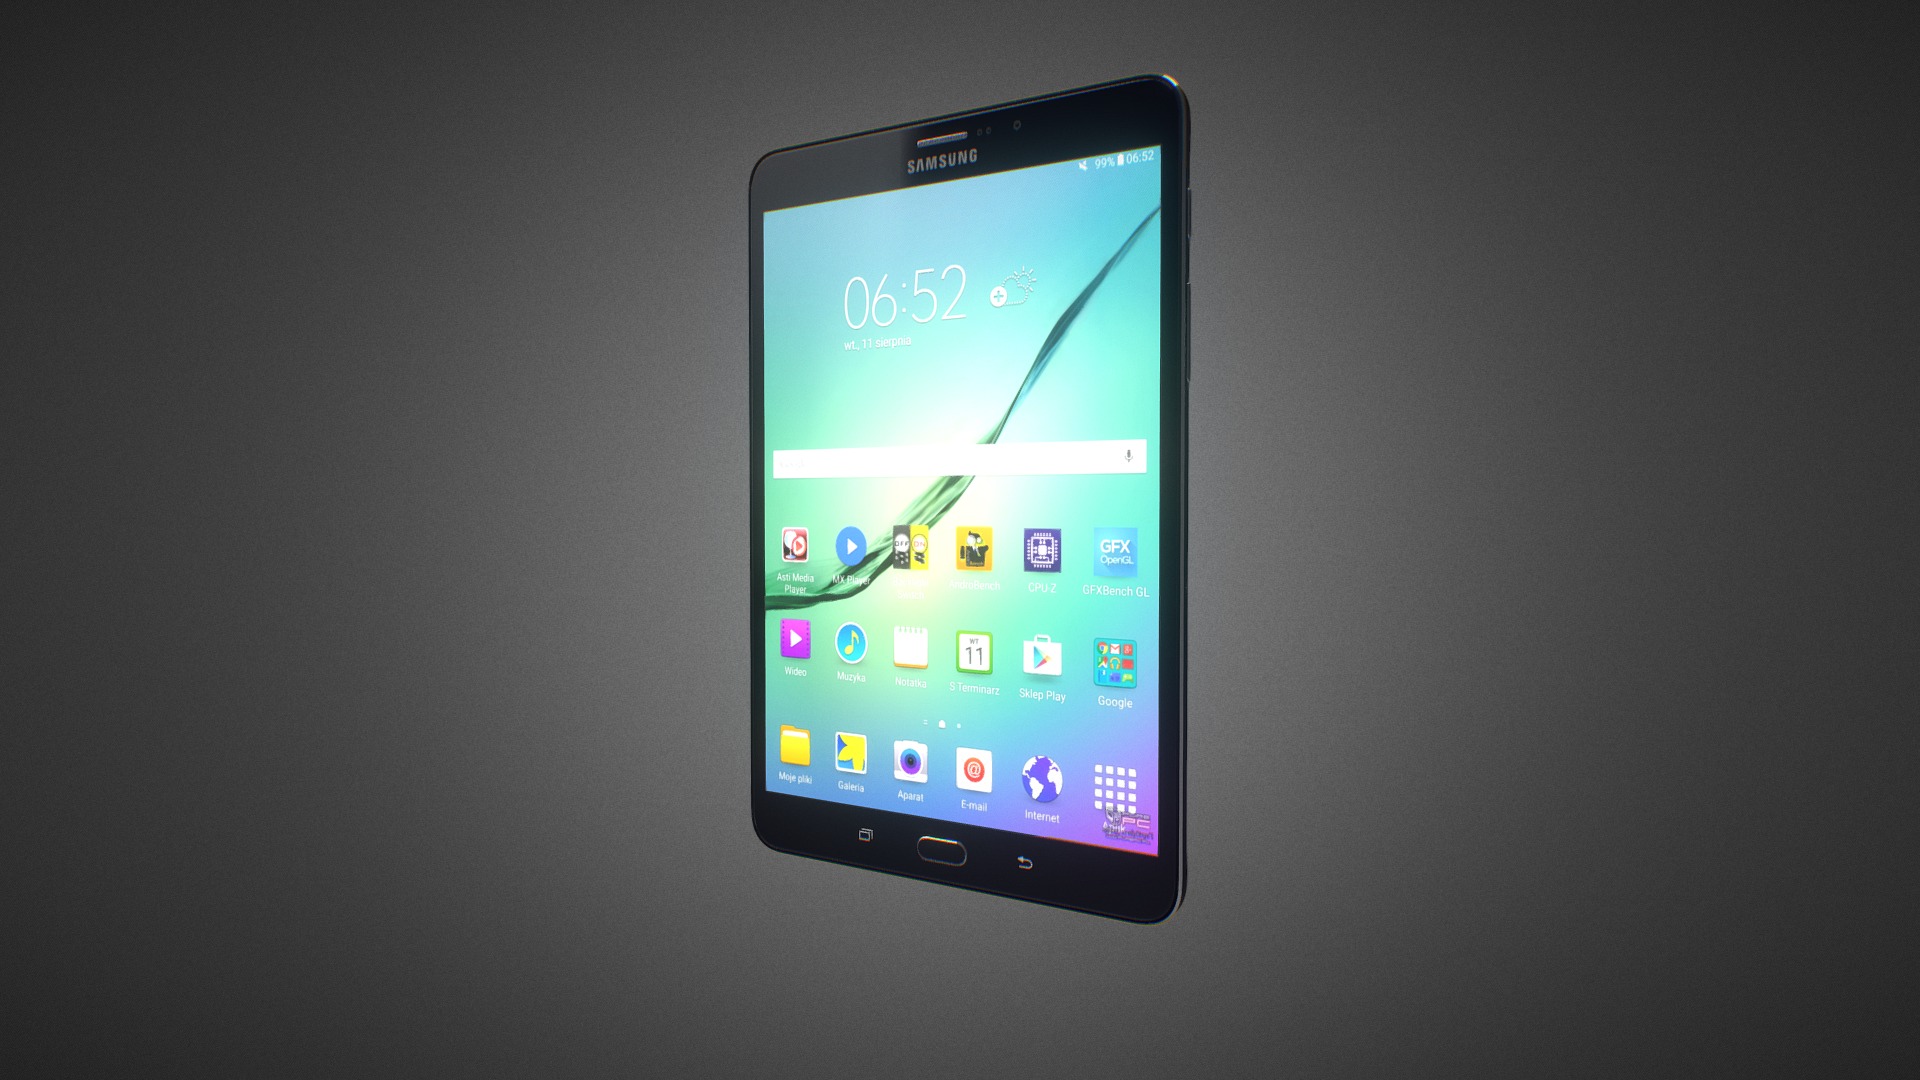 3D model Samsung Galaxy Tab S2 8.0 for Element 3D - This is a 3D model of the Samsung Galaxy Tab S2 8.0 for Element 3D. The 3D model is about a black smartphone with a blue screen.